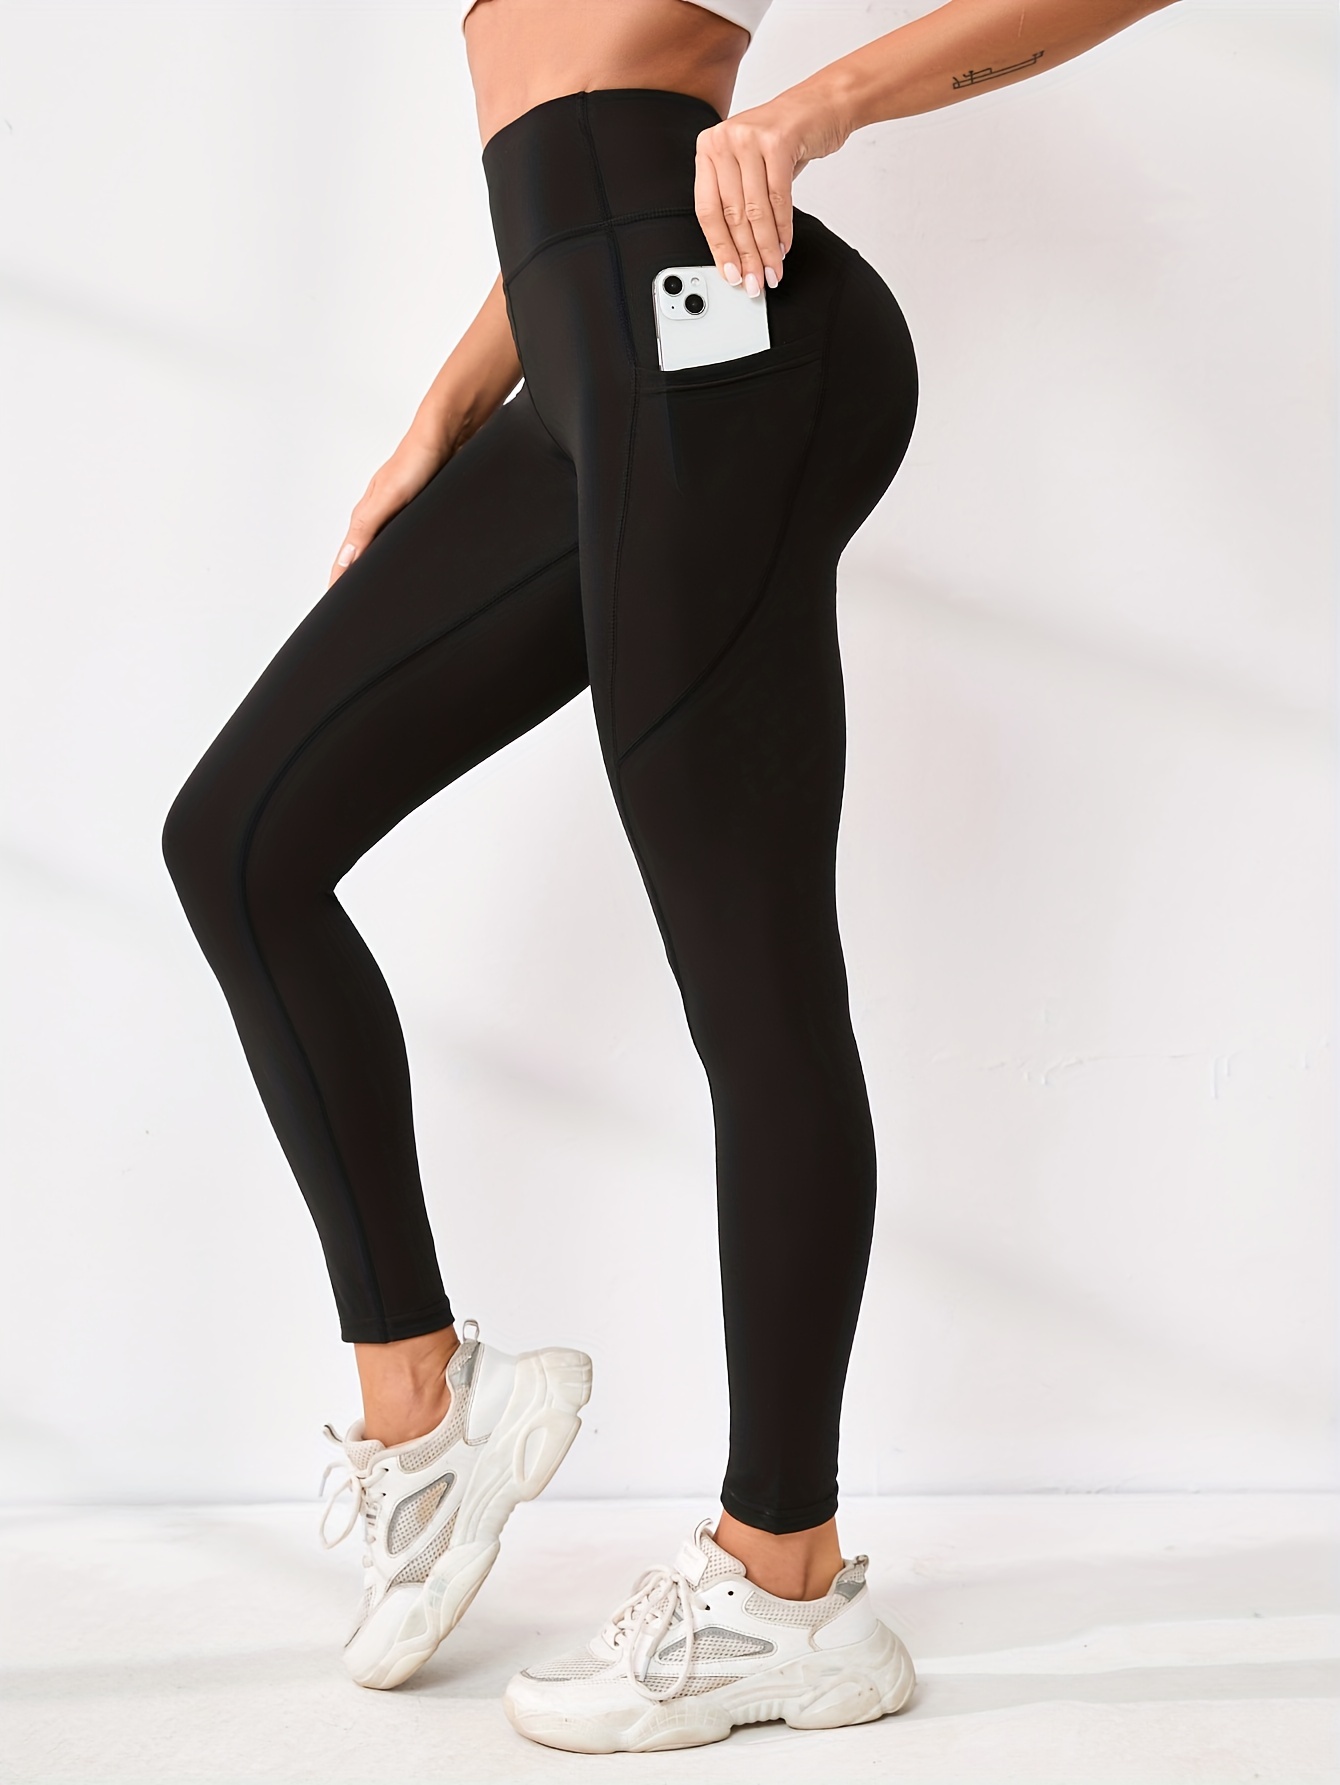 High Waist Seamless Leggings With Pockets With Pockets For Sports